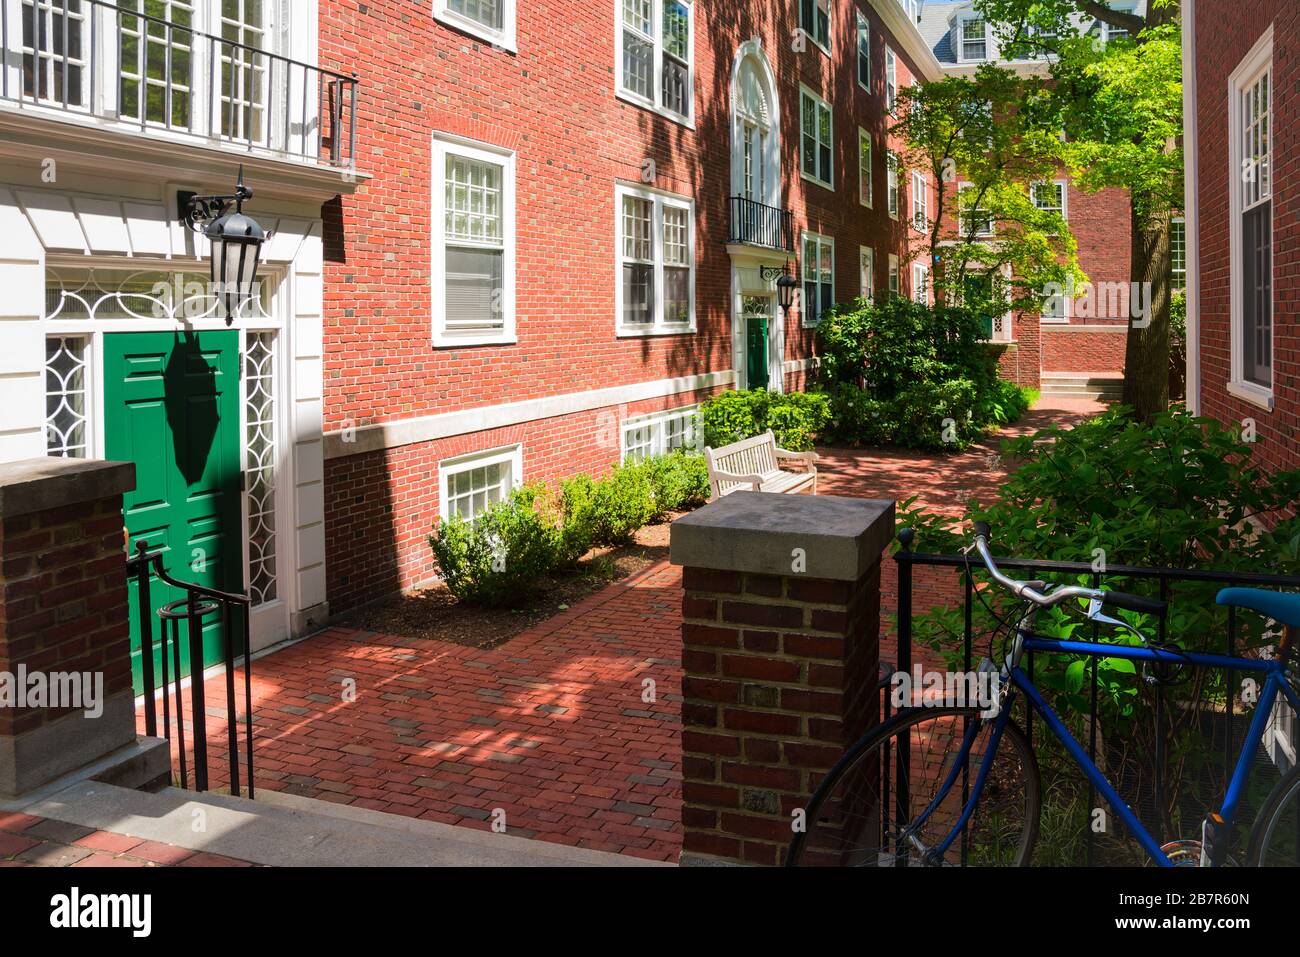 Red brick college dormitory with a bicycle and trees. Stock Photo